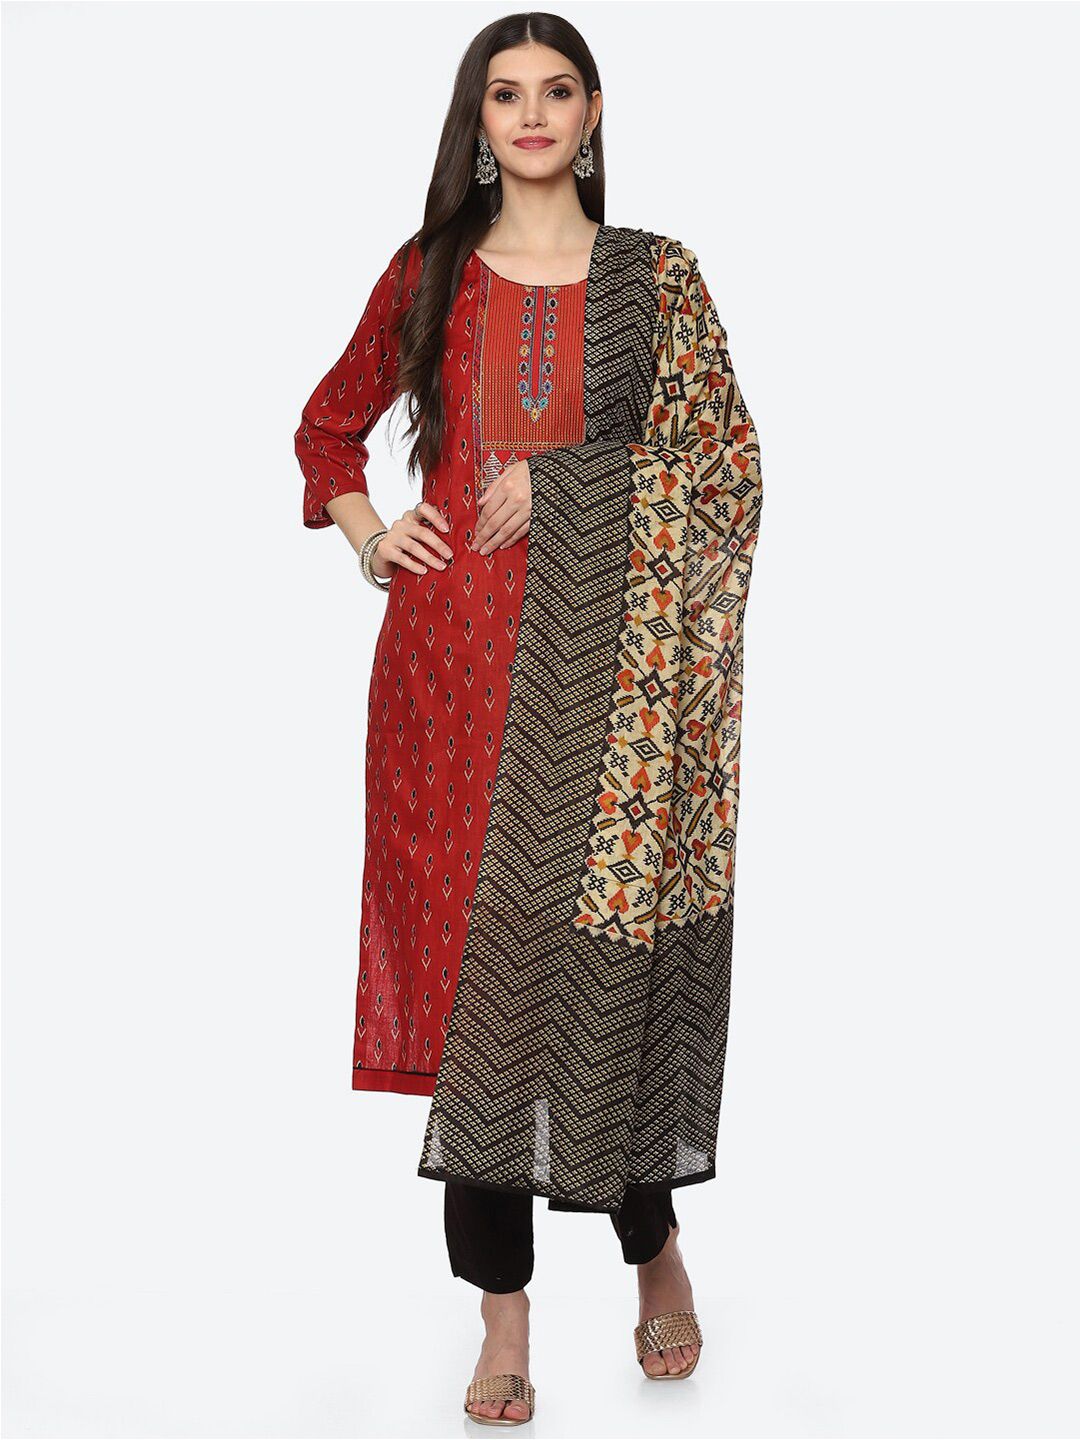 Biba Red & Black Printed Unstitched Dress Material Price in India